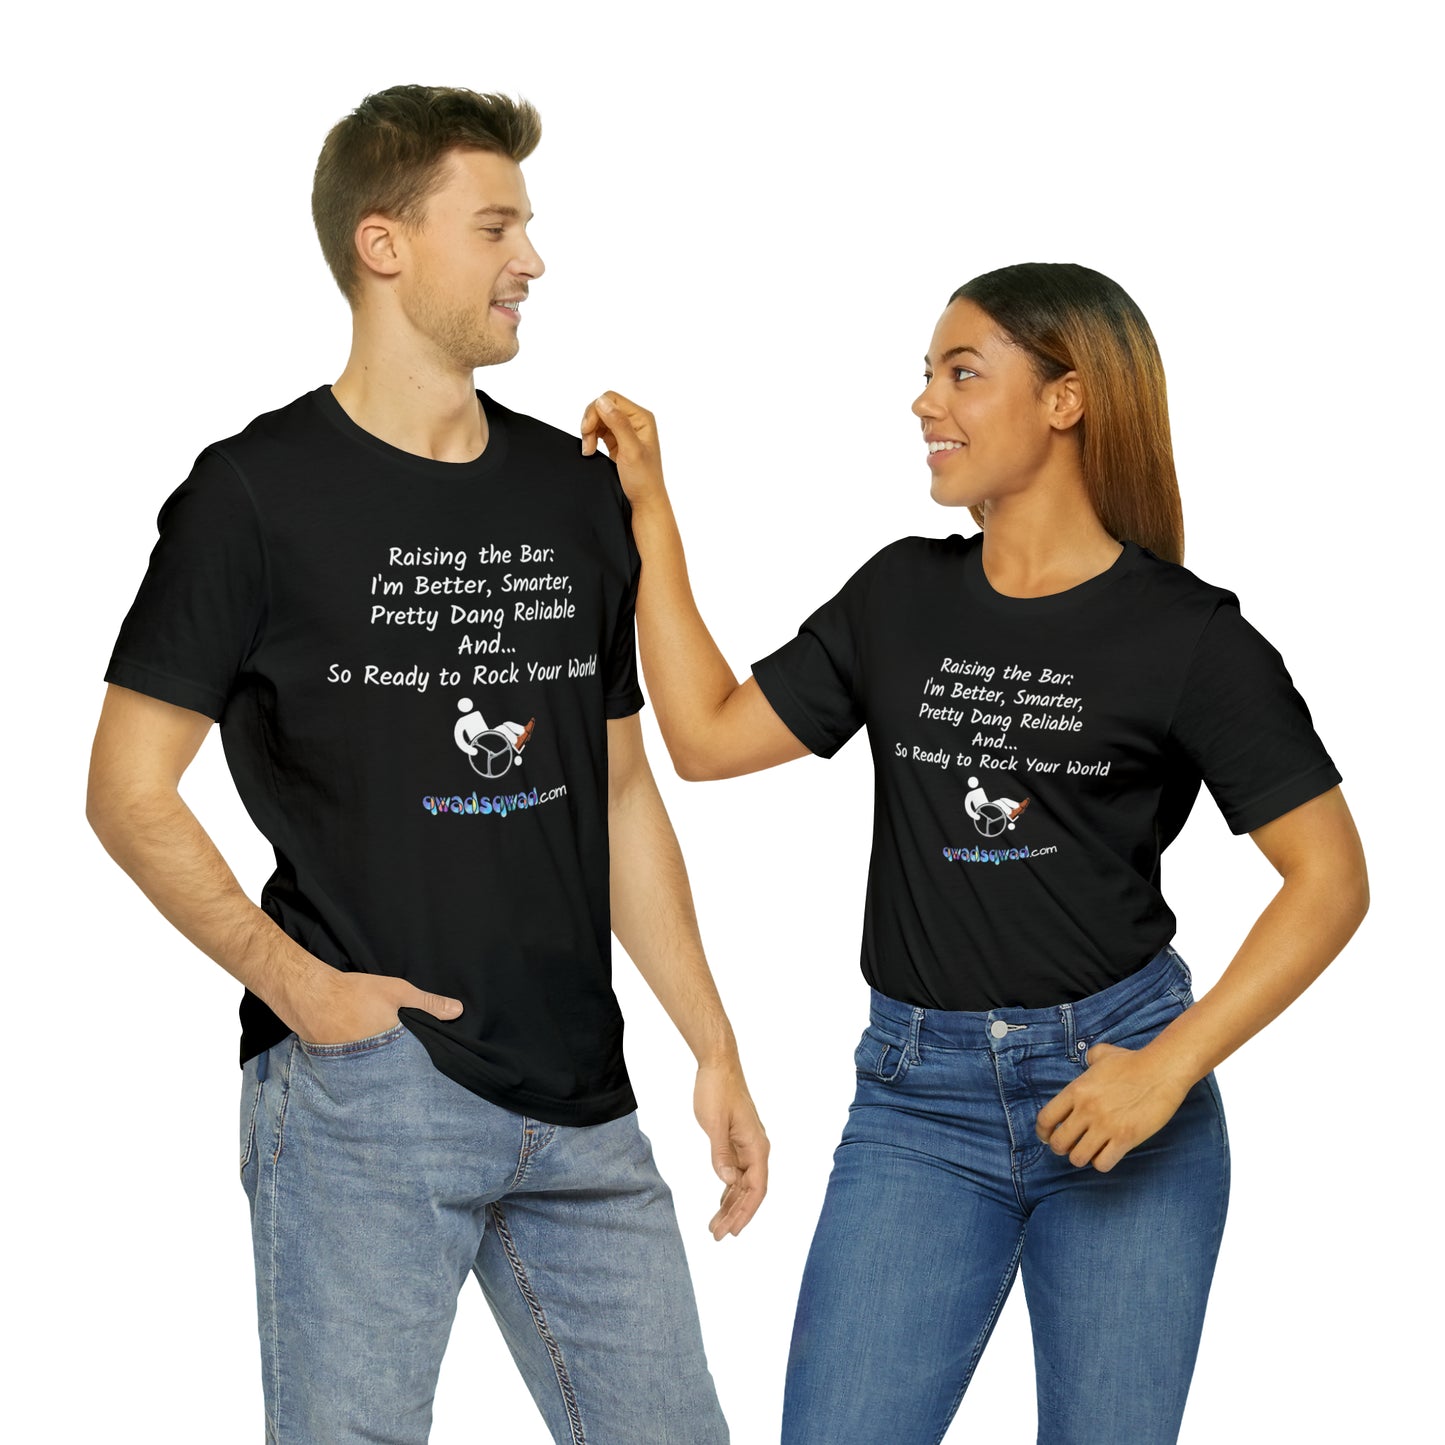 Breaking Stereotypes and Empowering: – Smarter, Reliable, and More Fun ! Unisex Short Sleeve Tee